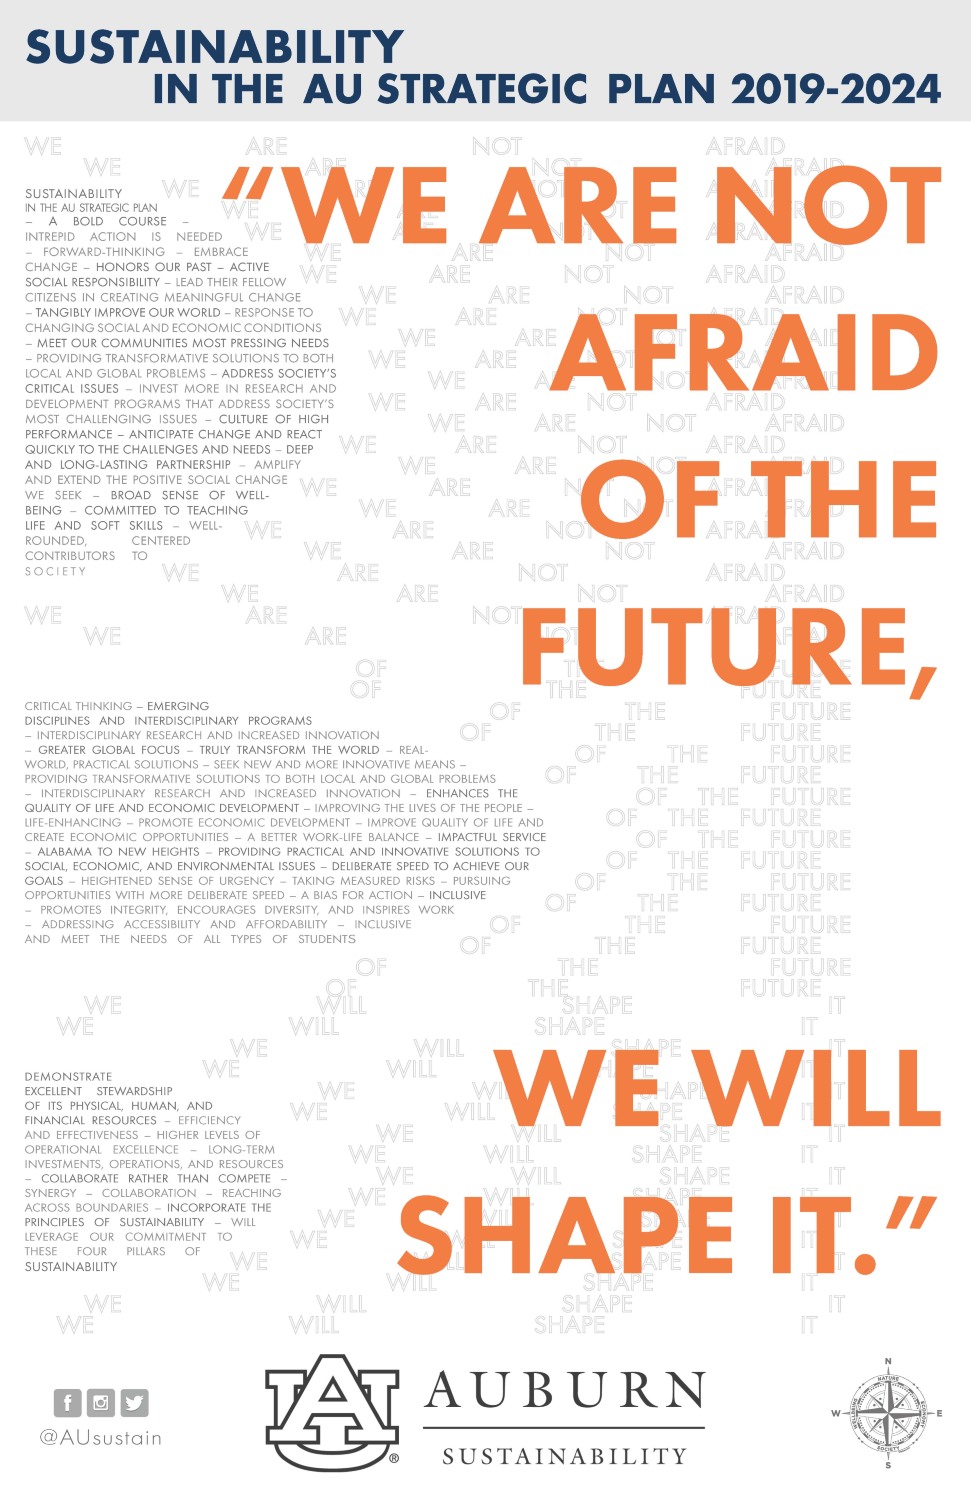 Graphic quoting Auburn University's Strategic Plan: "We are not afraid of the future, we will shape it."